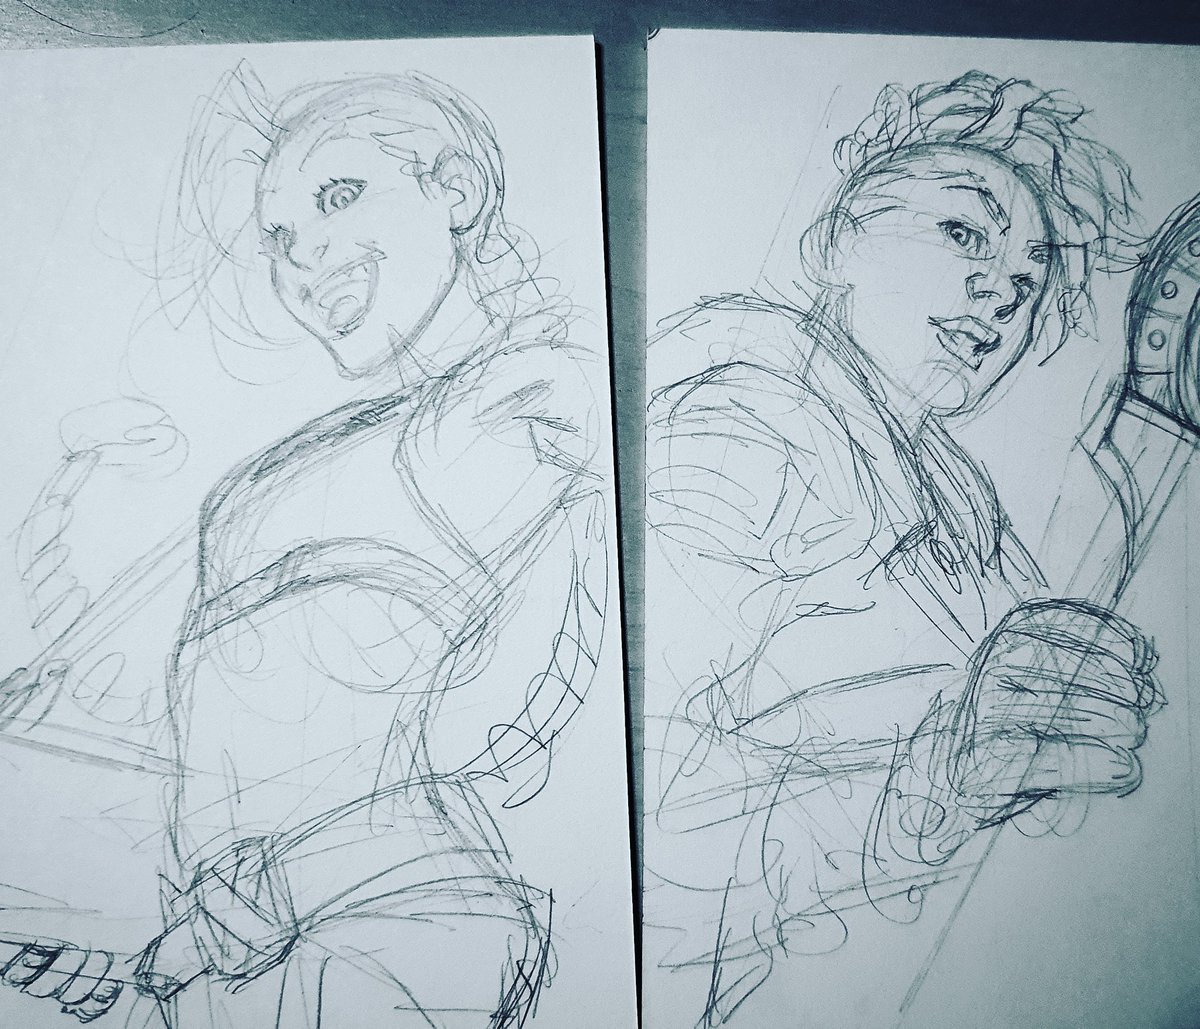 More #Arcane fan arts on the way, those characters are a pleasure to draw!
#Jinx #Ekko 